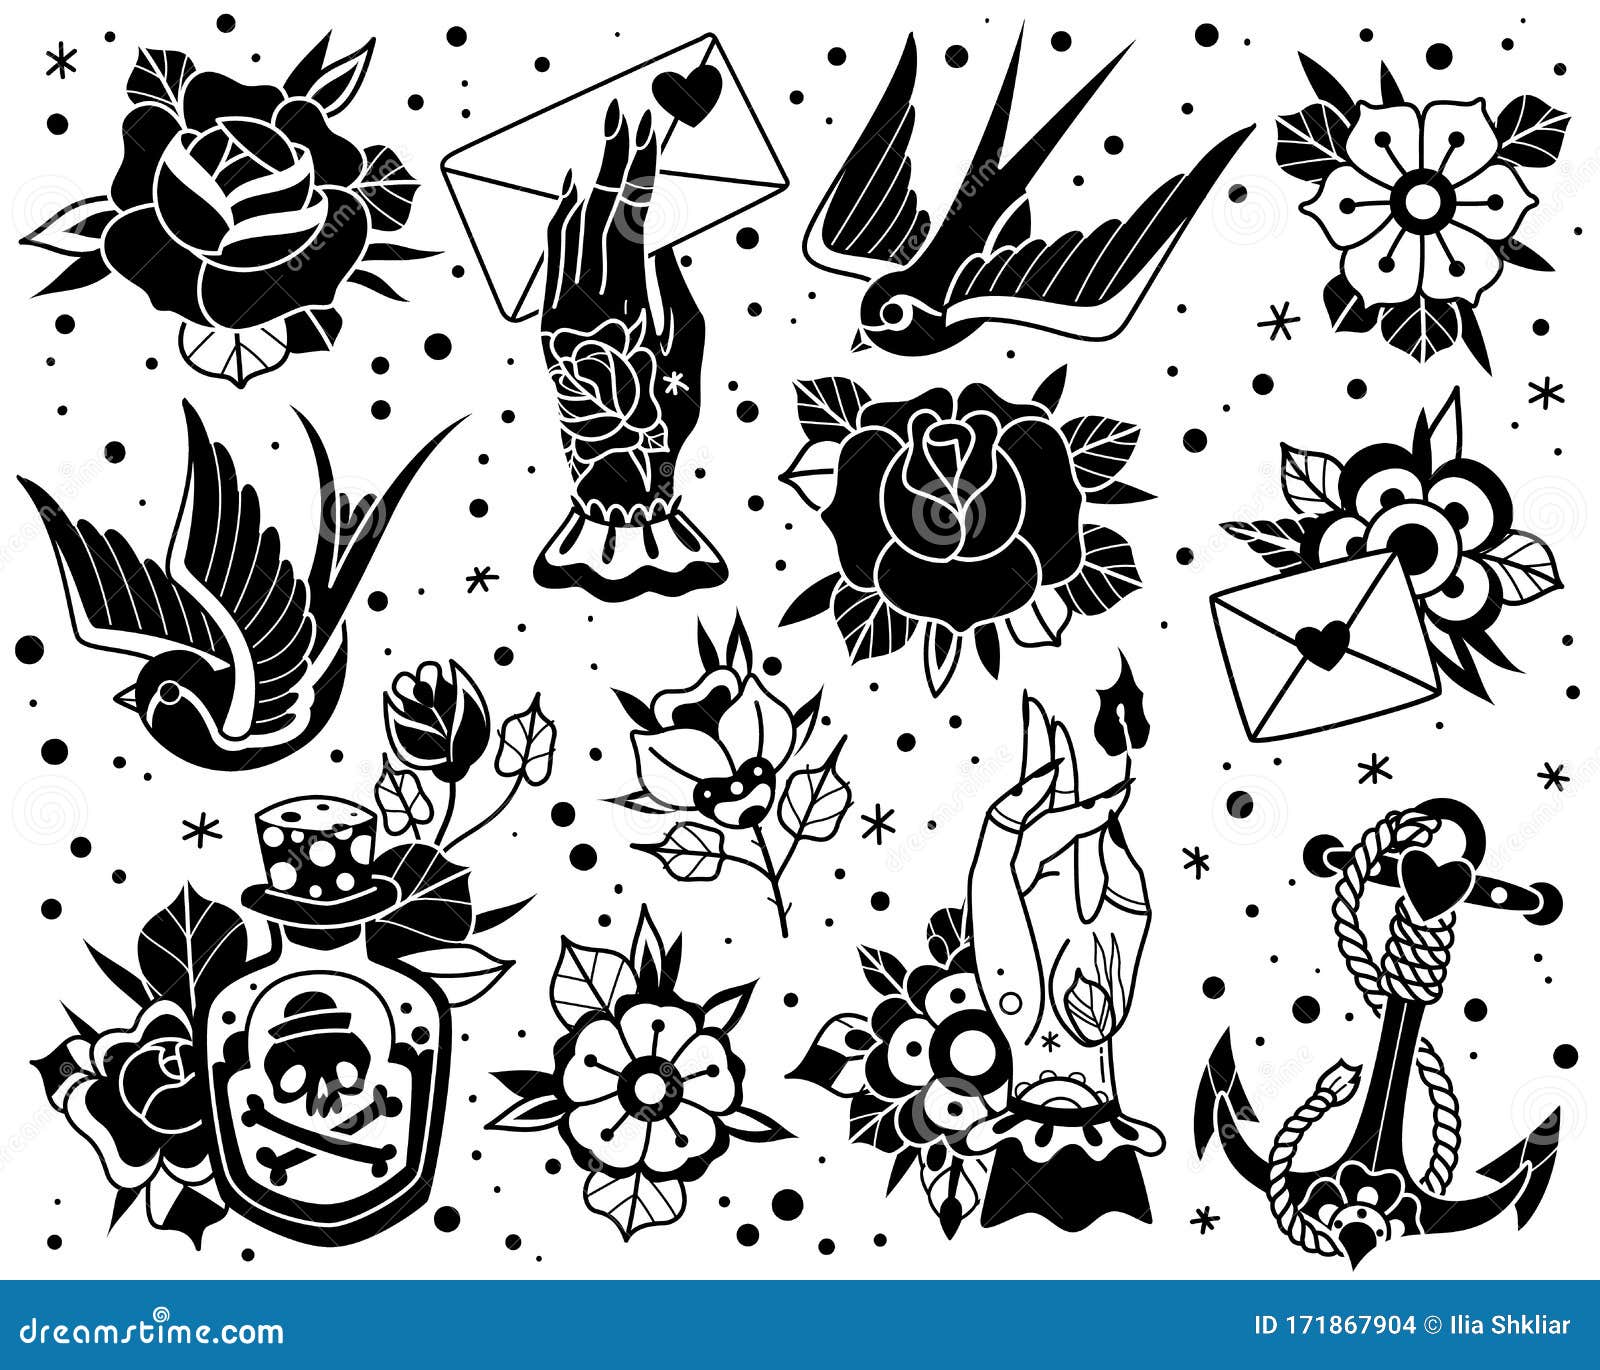 698264 Black White Tattoo Designs Images Stock Photos  Vectors   Shutterstock